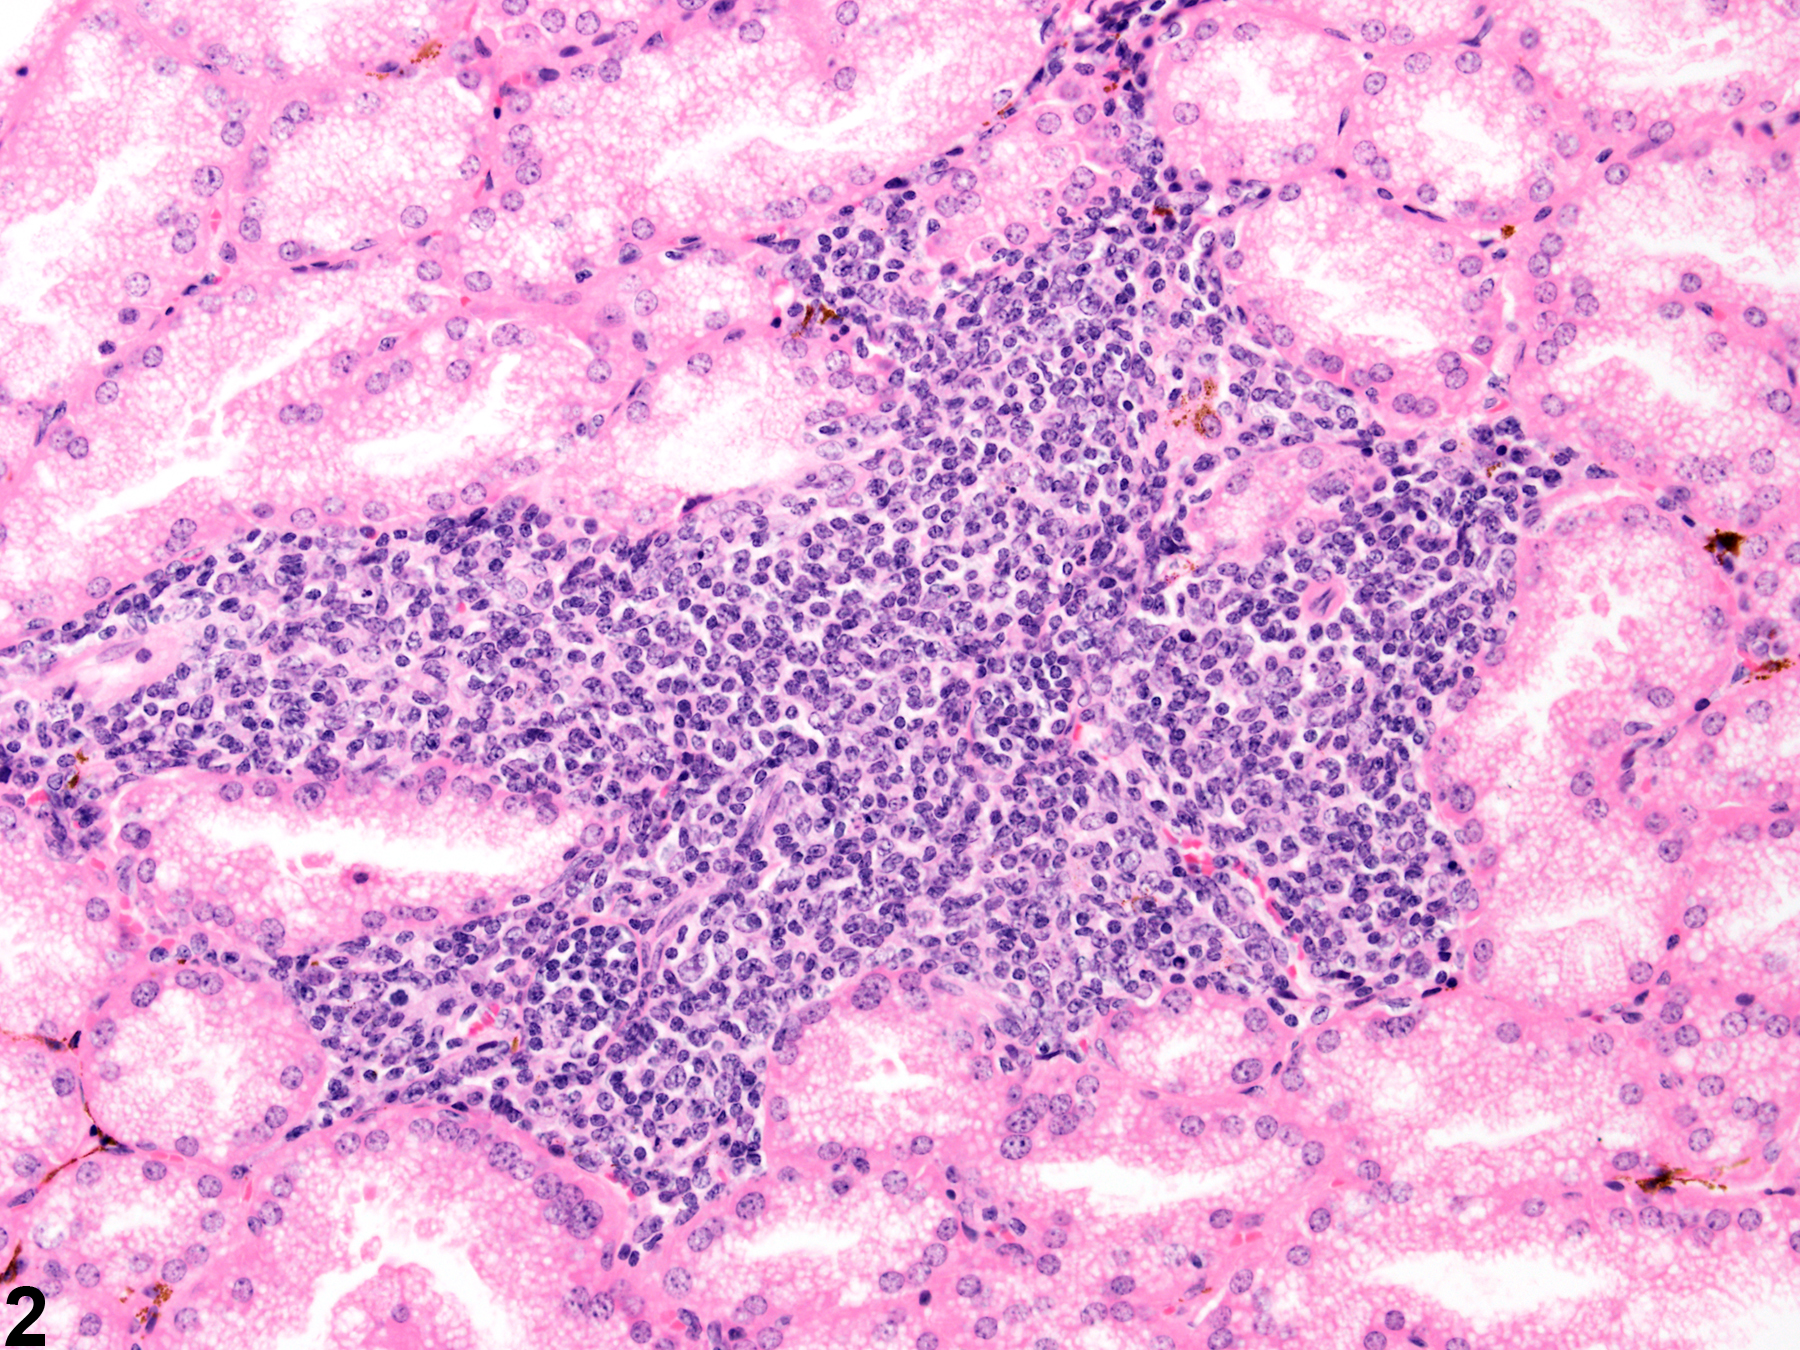 Image of infiltration cellular, mononuclear cell in the Harderian gland from a female B6C3F1 mouse in a chronic study